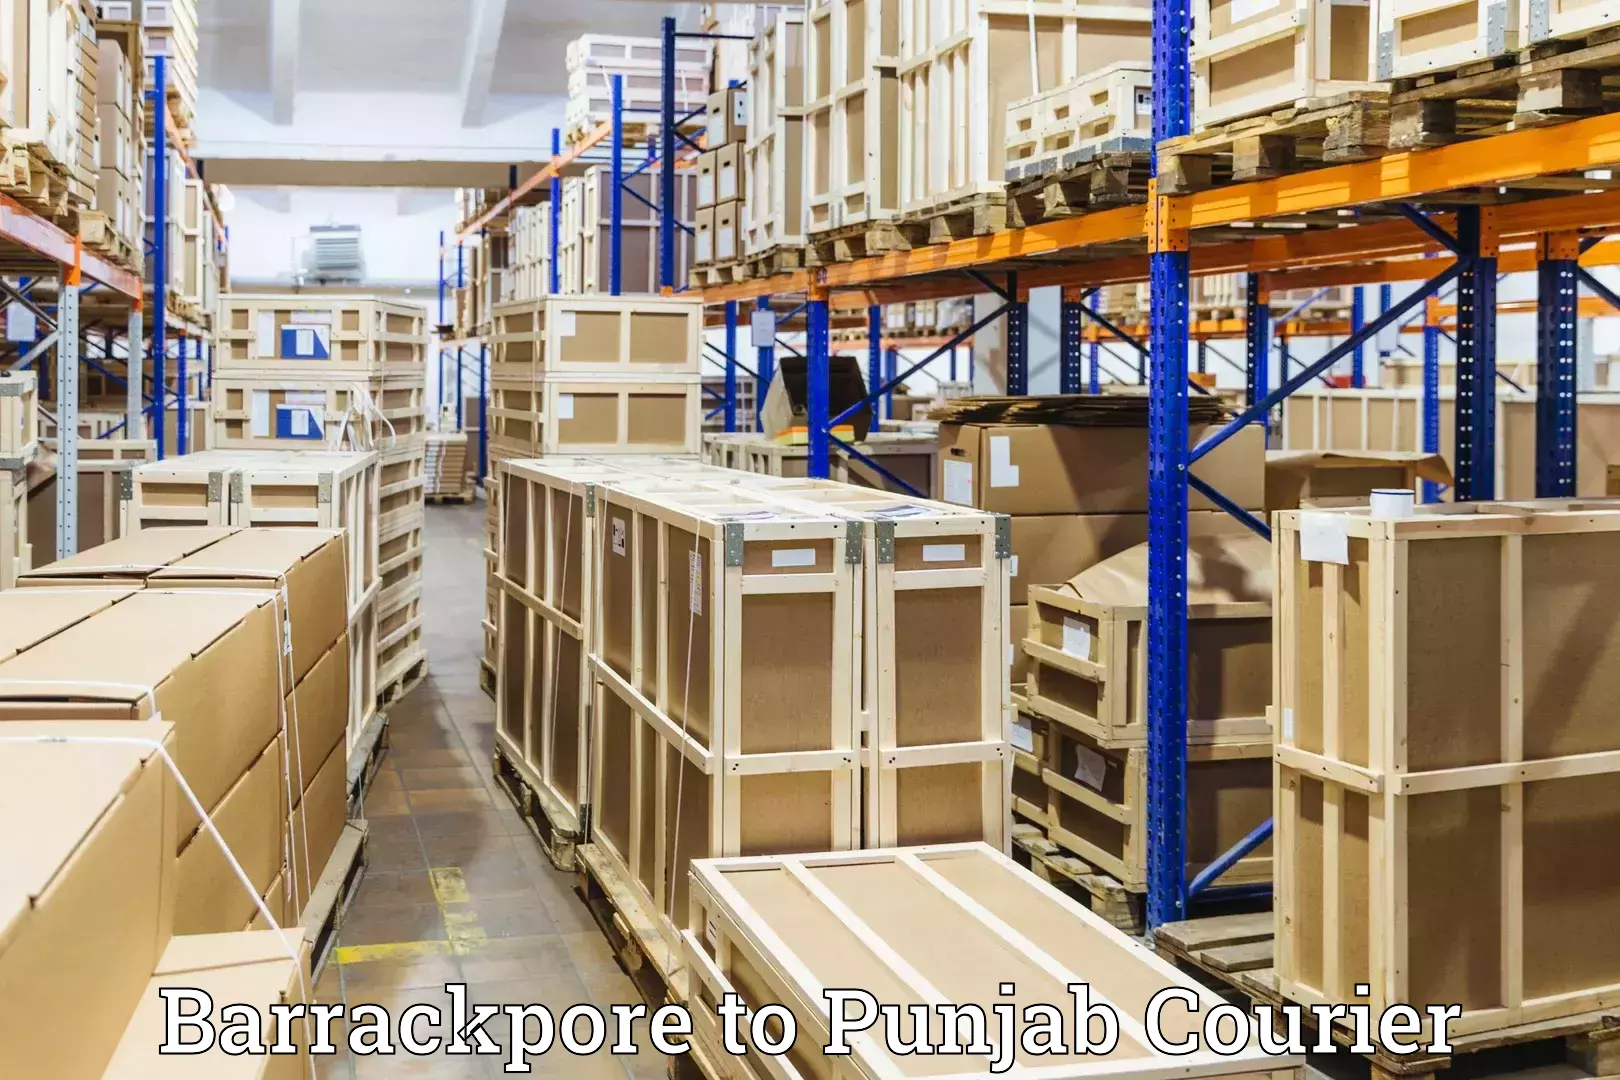 Luggage shipment specialists Barrackpore to Sangrur